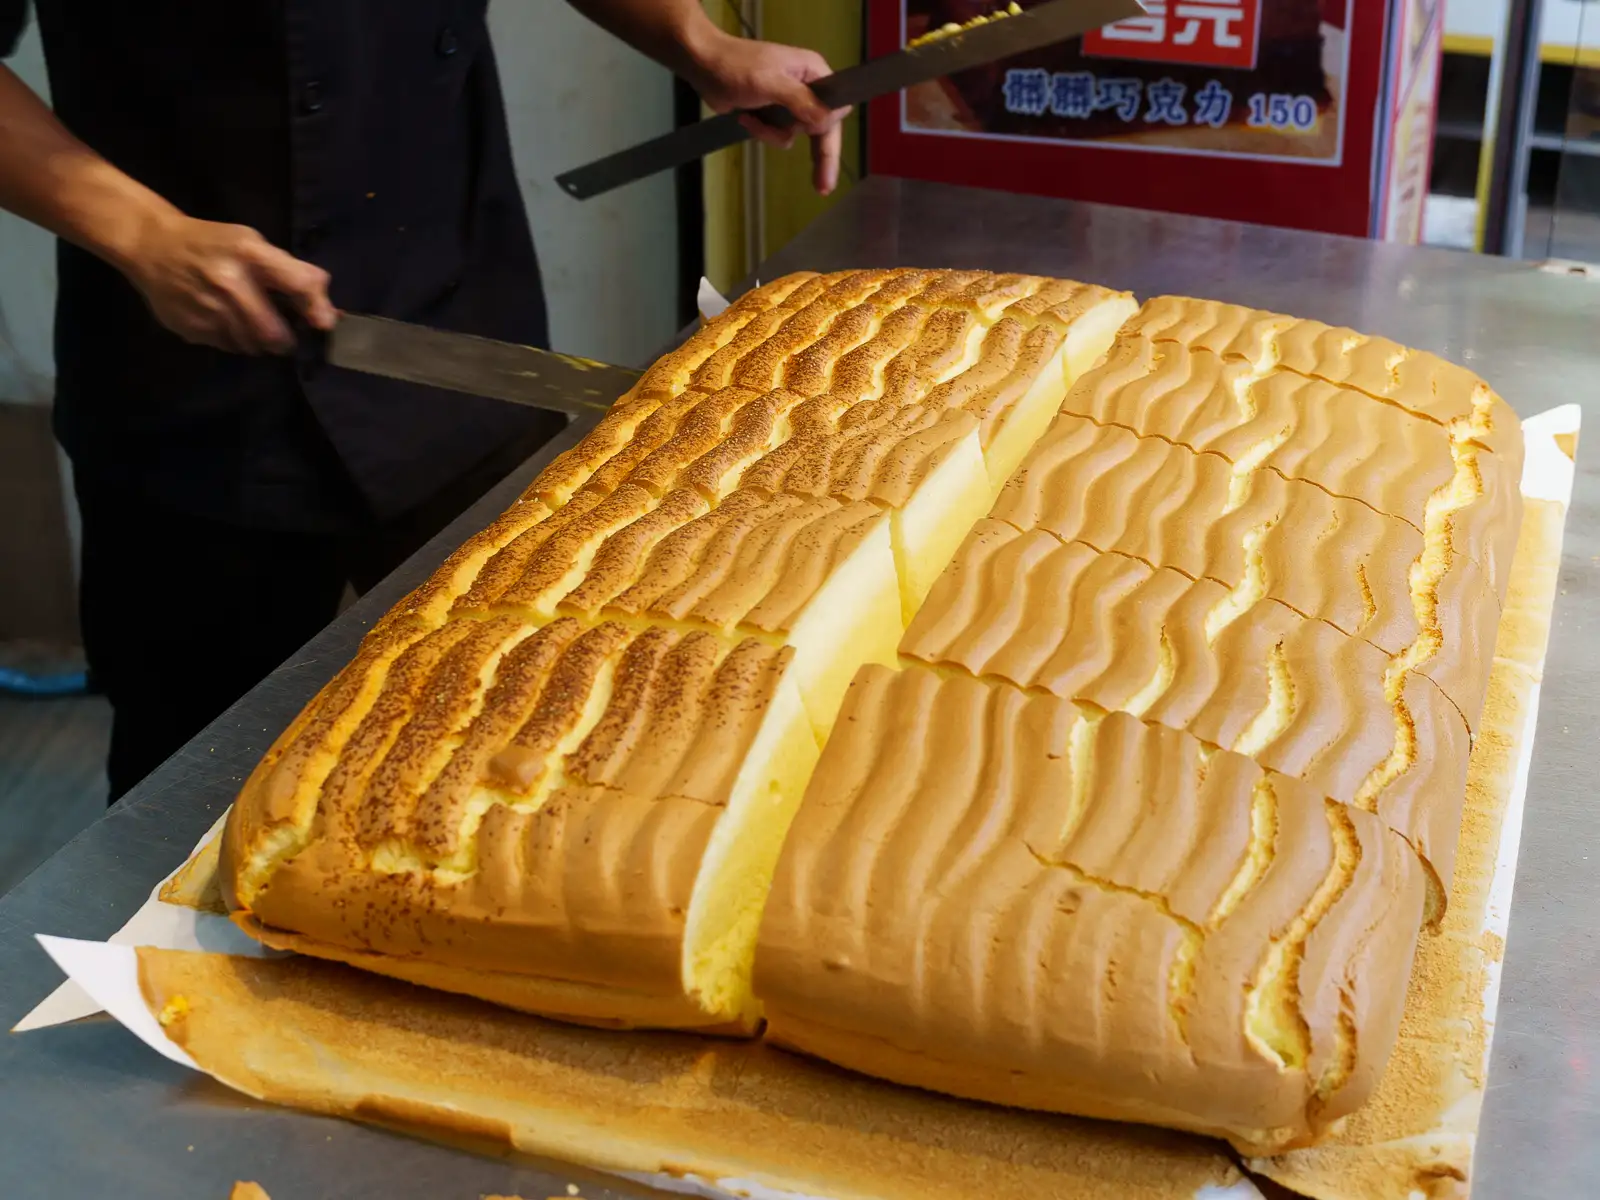 A large loaf of castella cake being cut into portions.